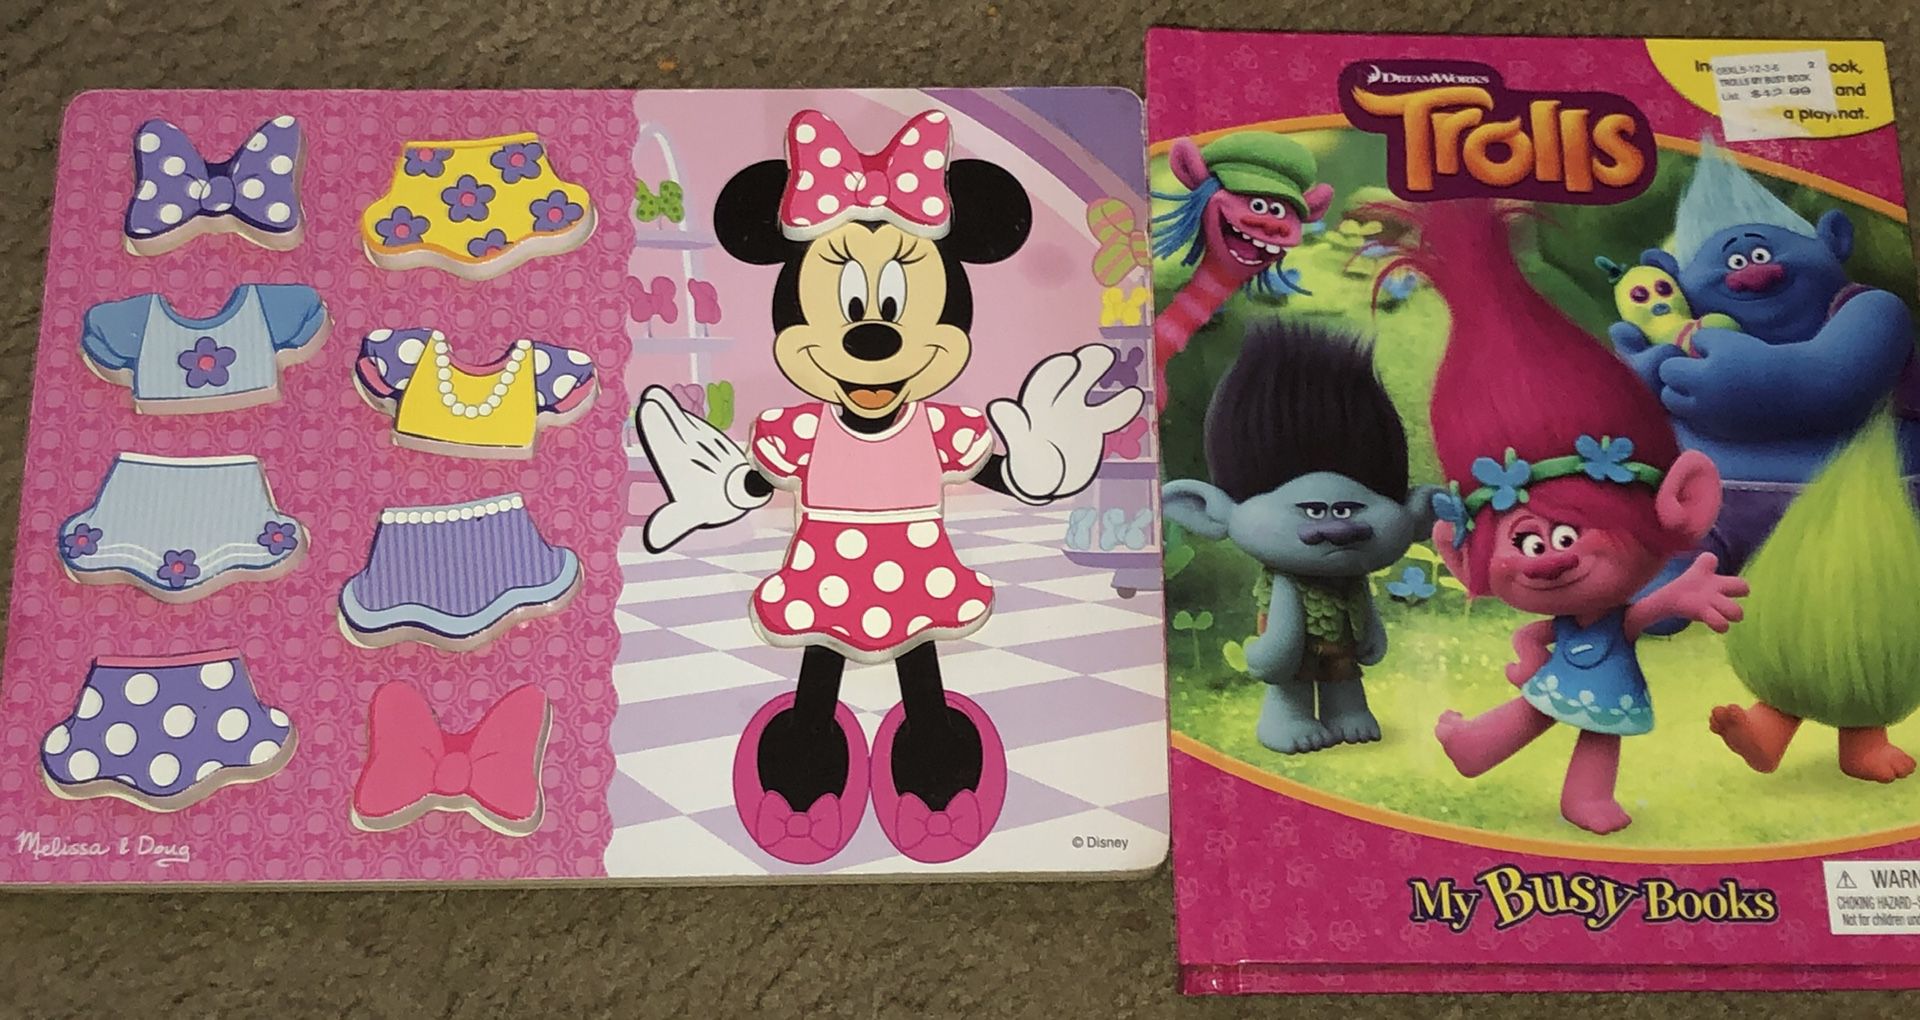 Minnie Mouse and Trolls